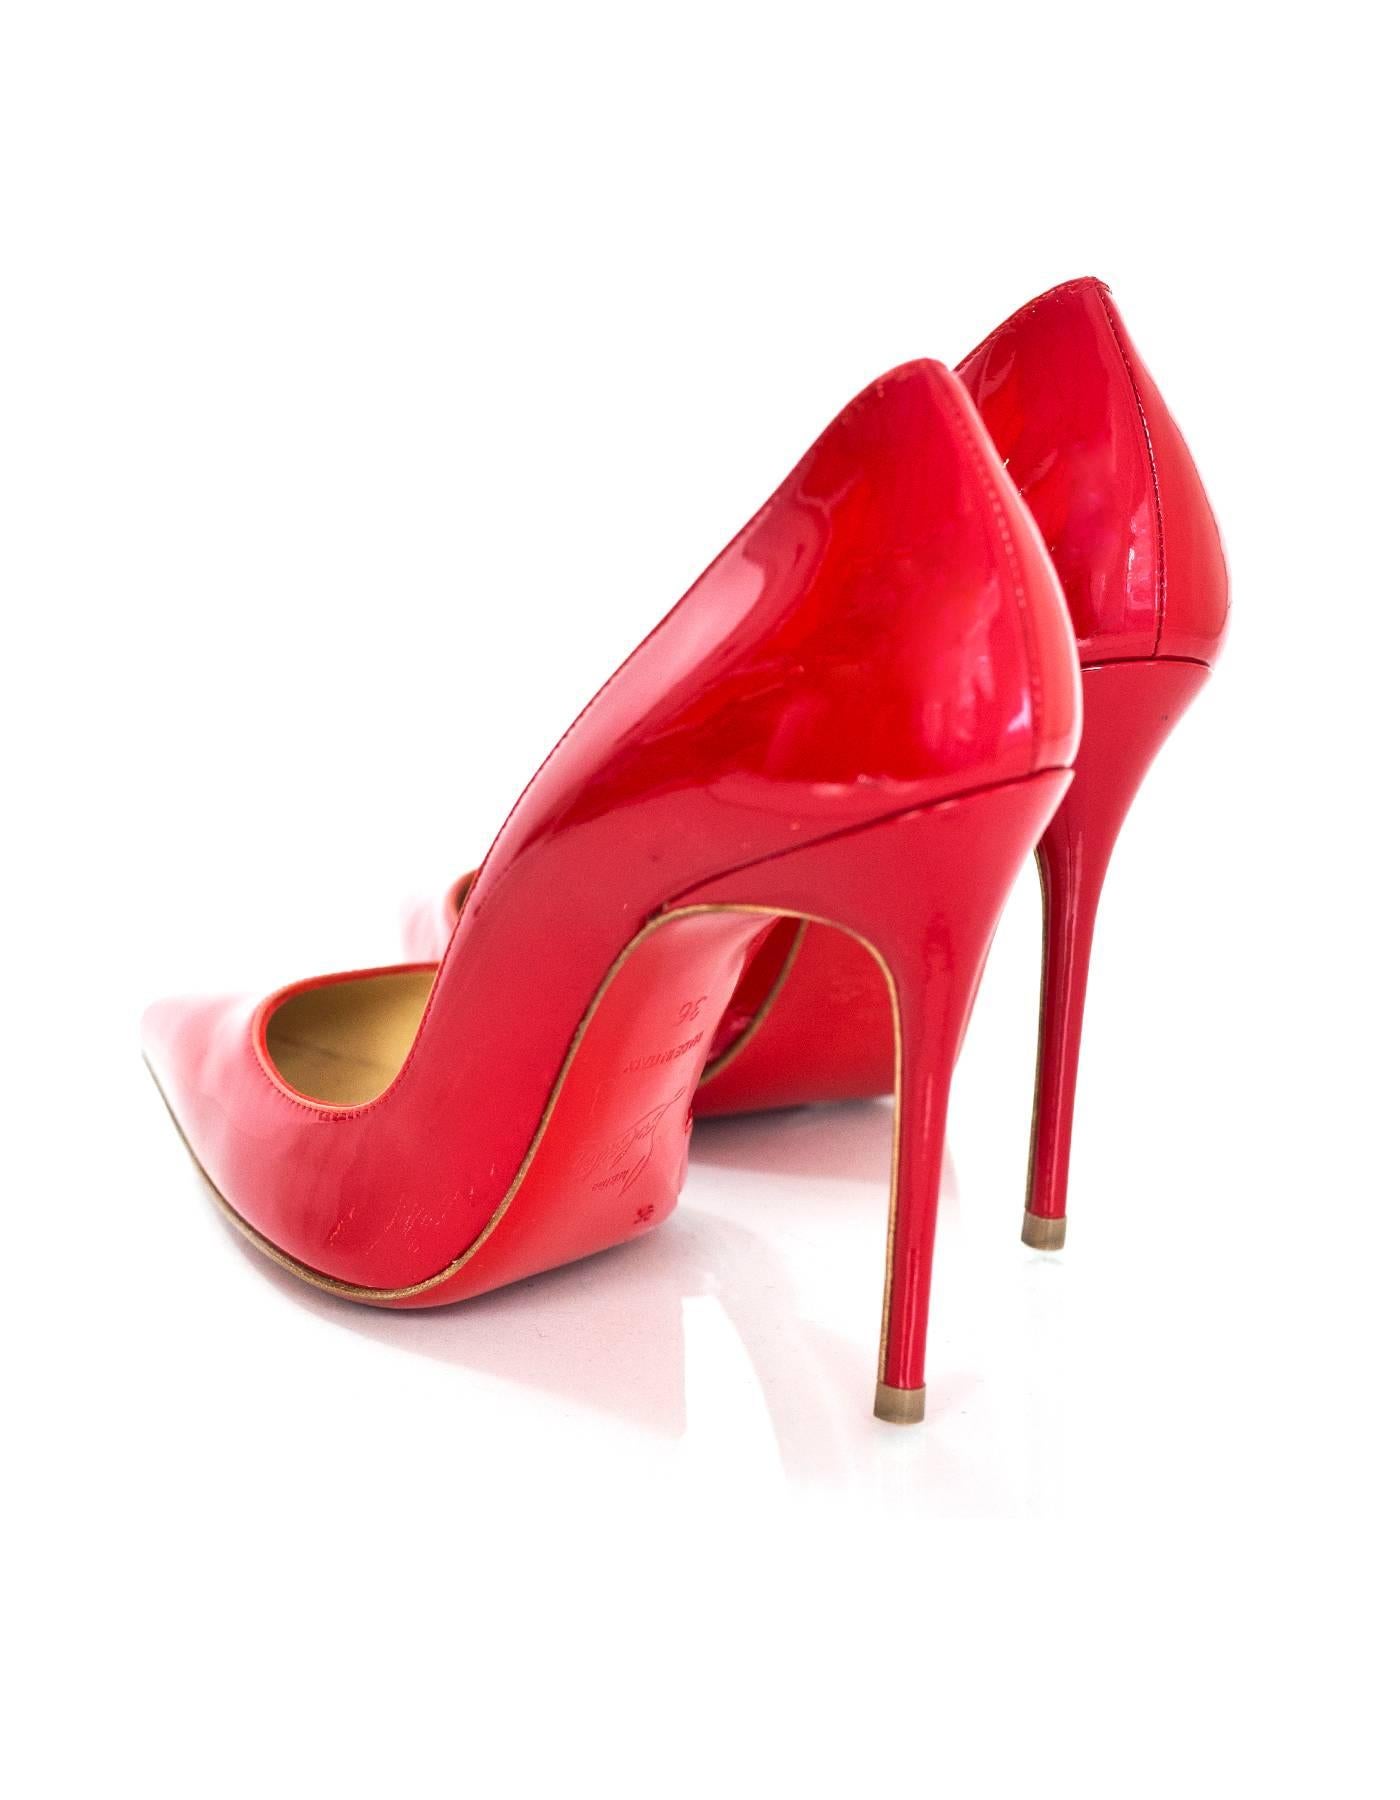 Women's 10/5 Christian Louboutin Red Patent Iriza d'Orsay Pumps Sz 36 with DB